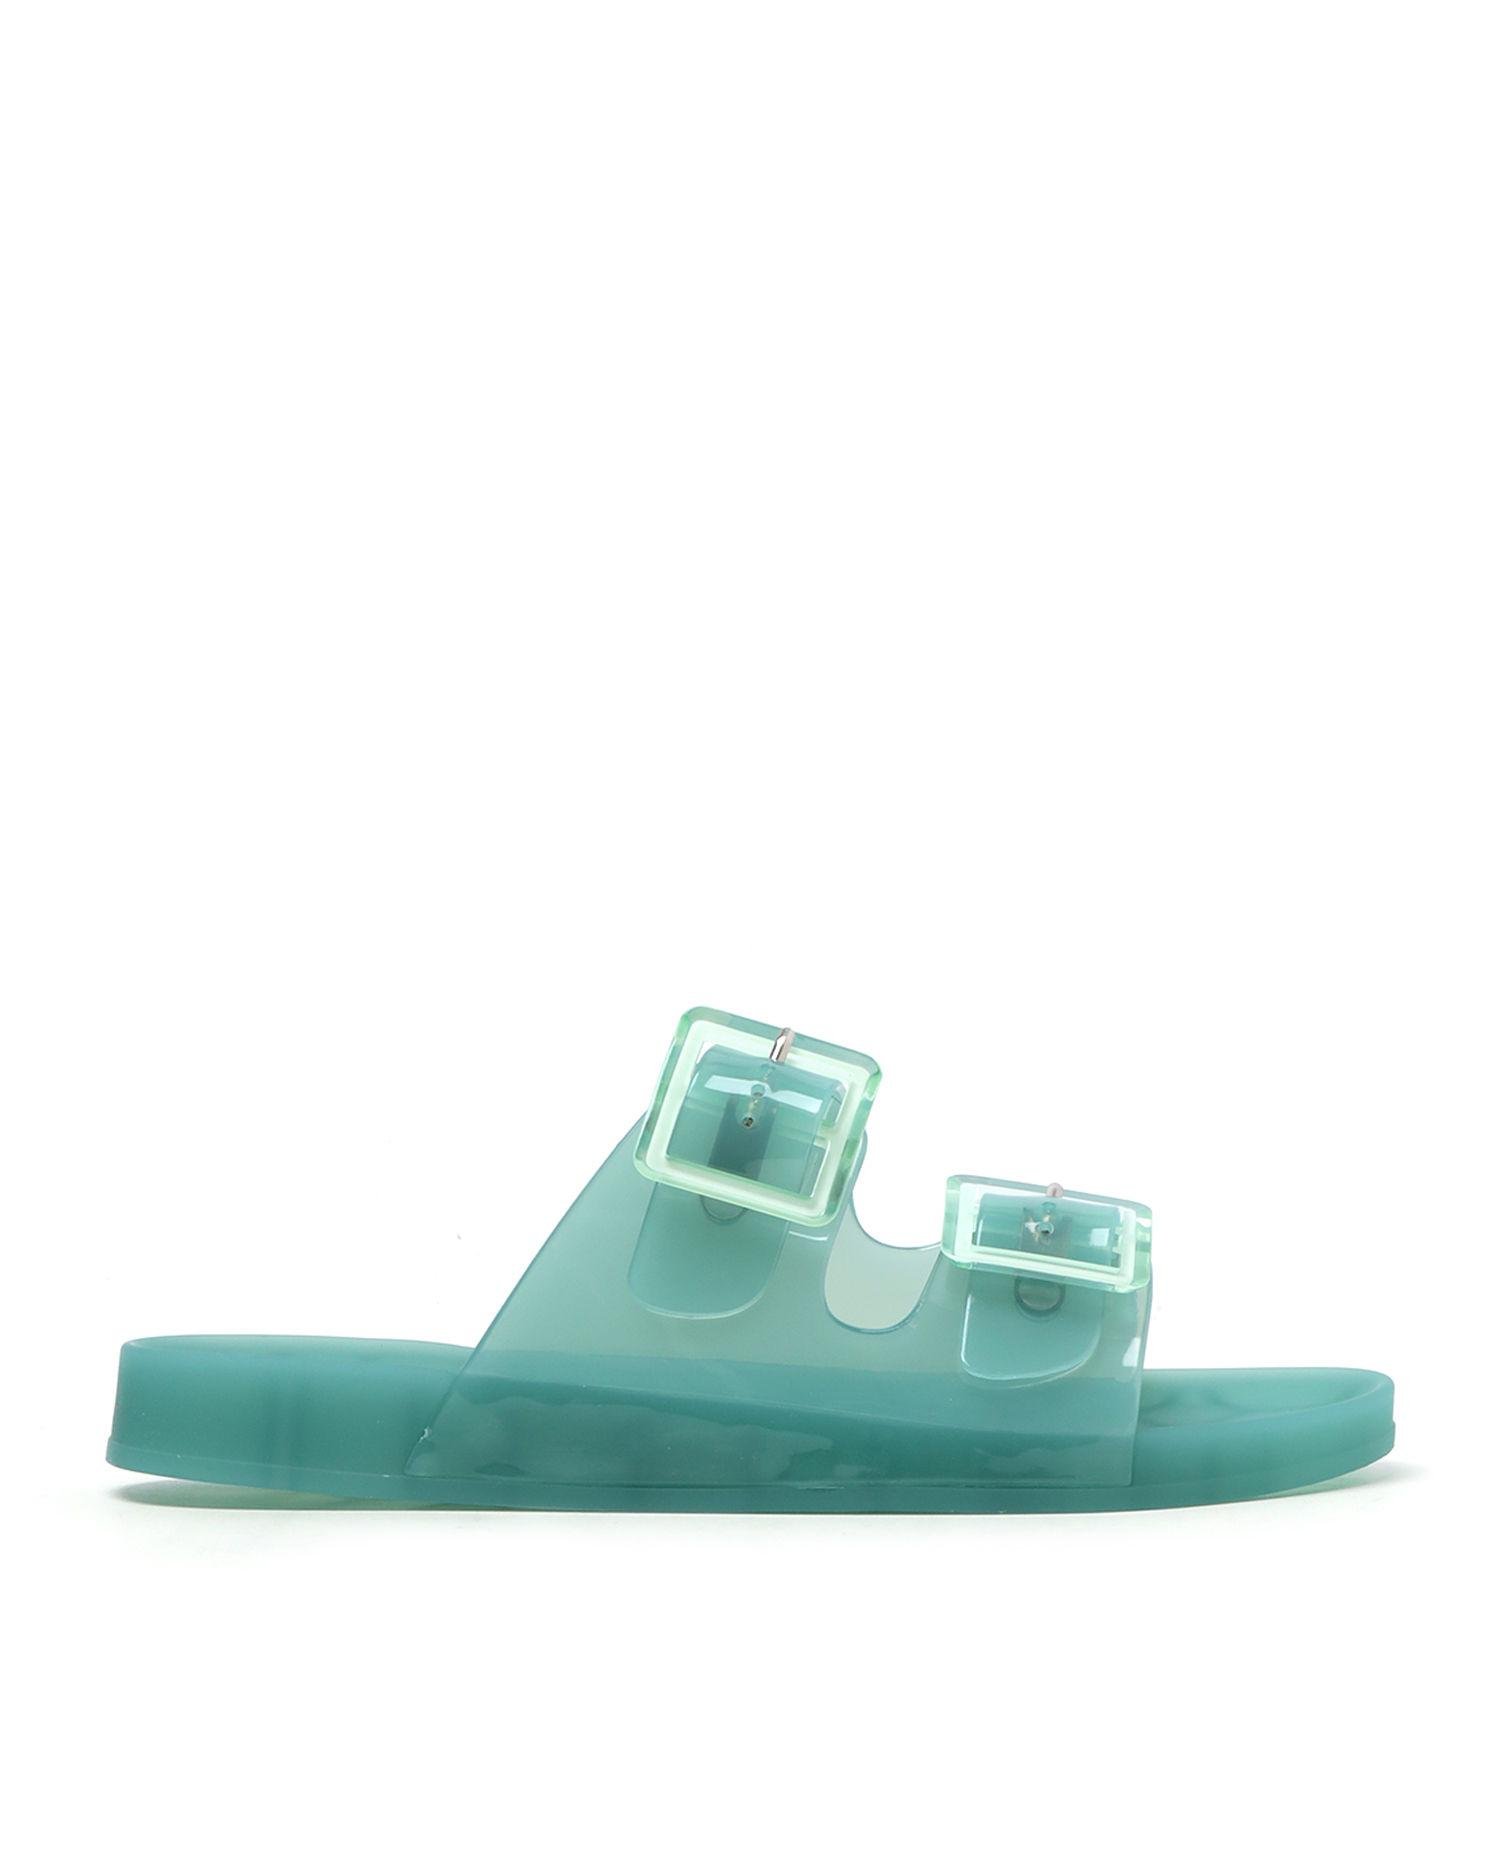 Monochrome jelly sandals by COLORS OF CALIFORNIA